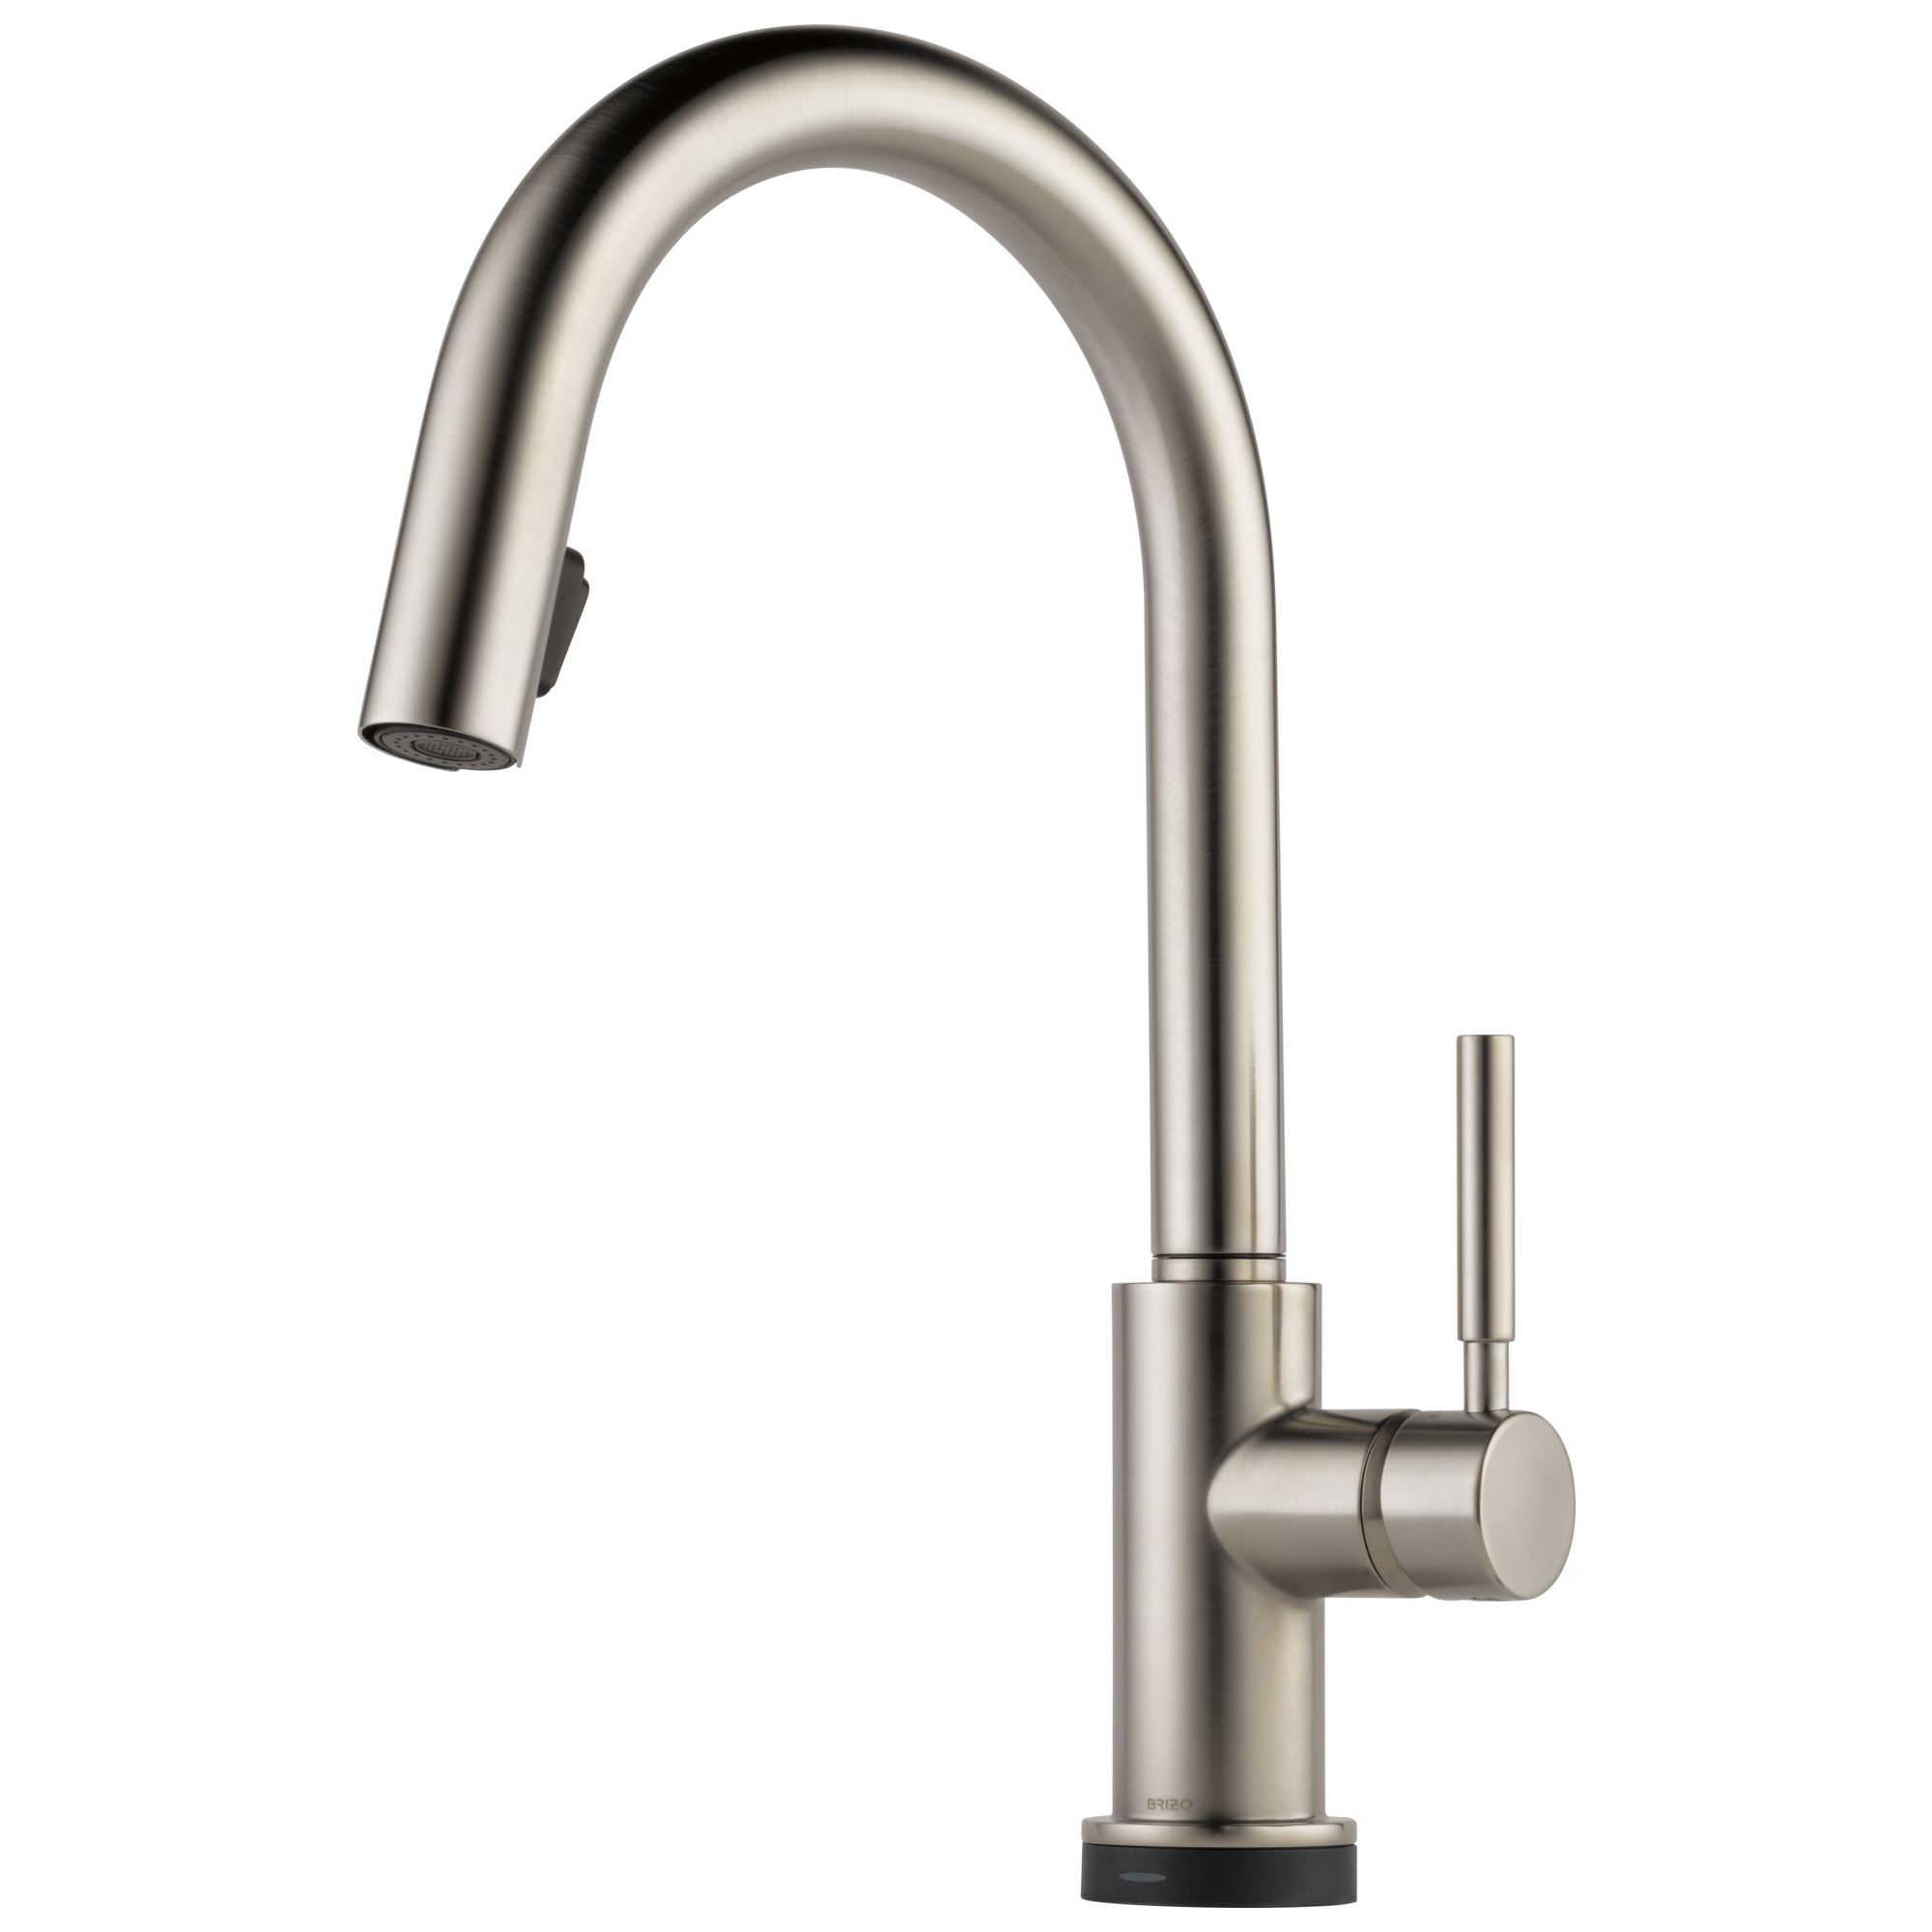 Brizo Solna: Single Handle Single Hole Pull-Down Kitchen Faucet with SmartTouch(R) Technology